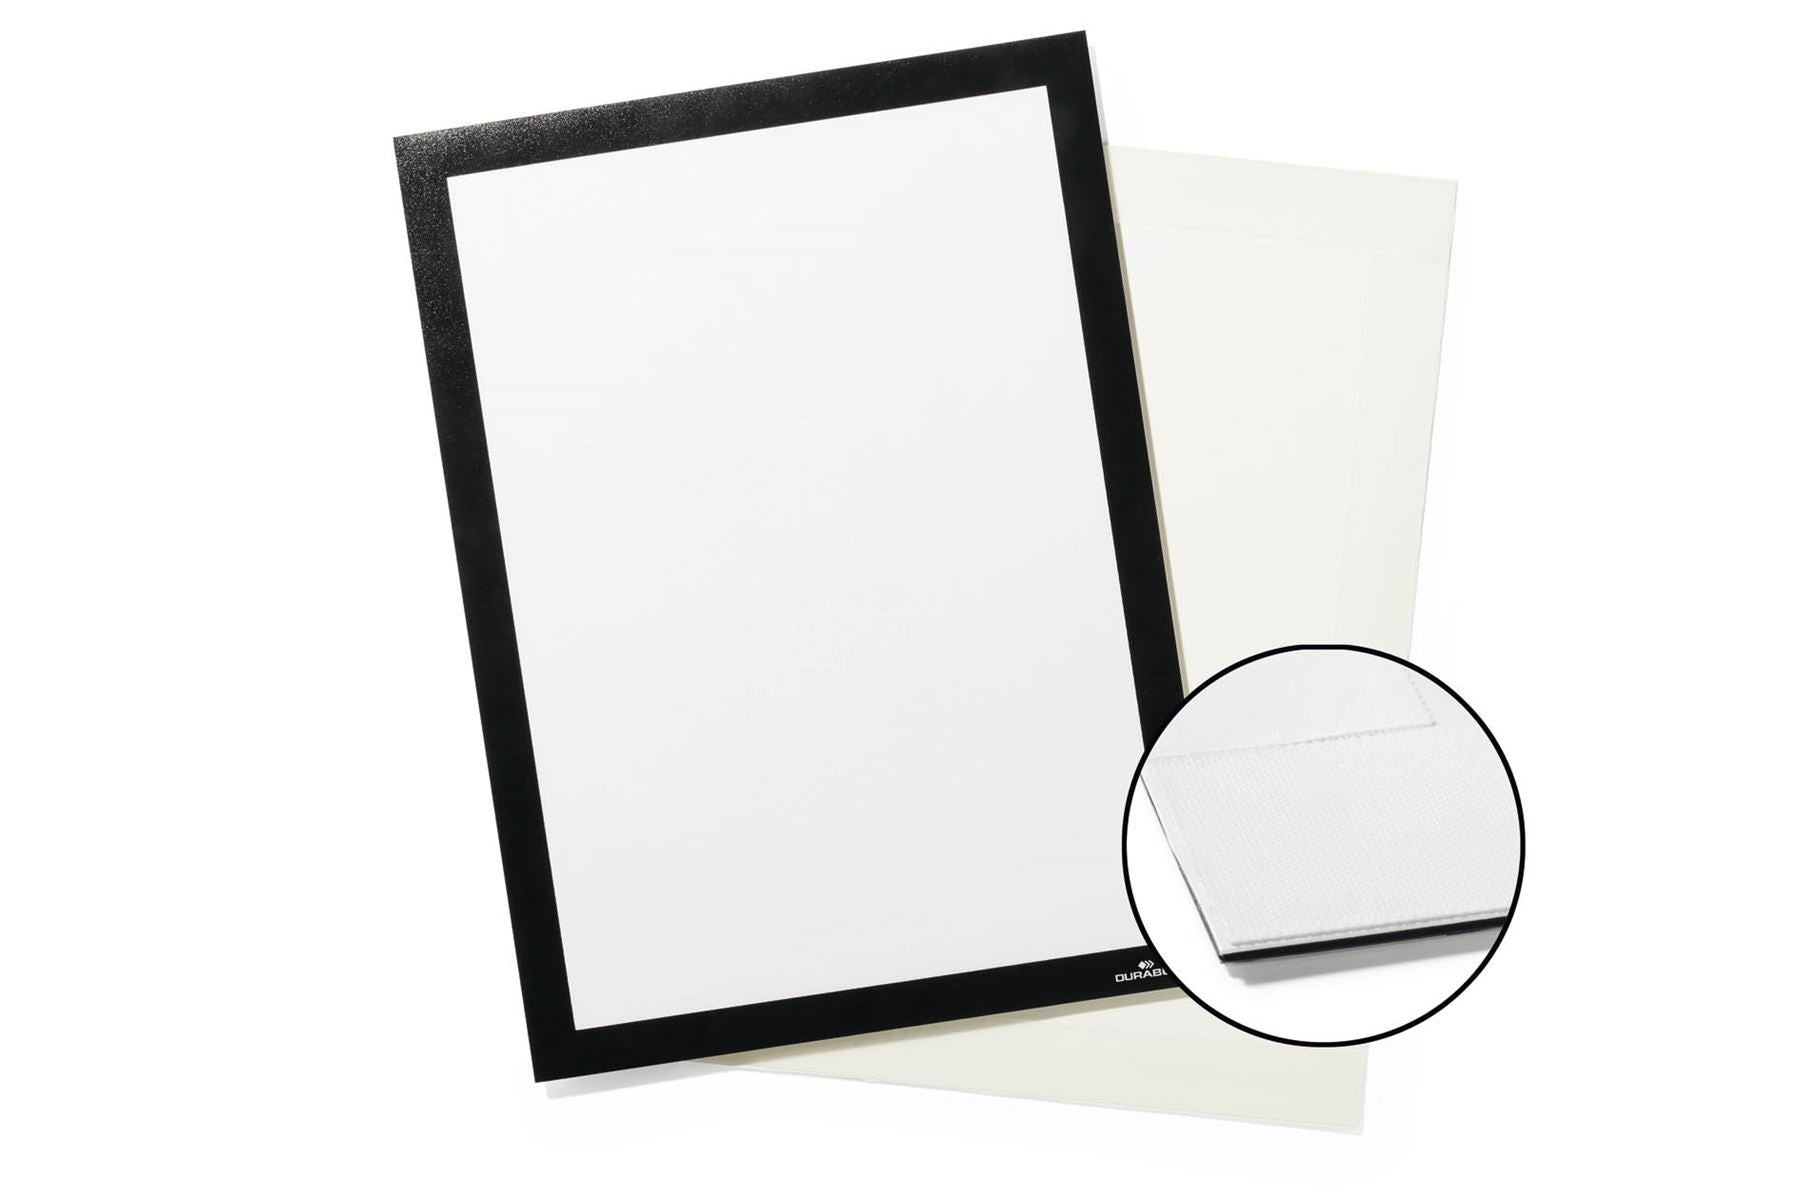 Durable DURAFRAME GRIP Fabric Adhesive Magnetic Signage Frame | A4 | Black